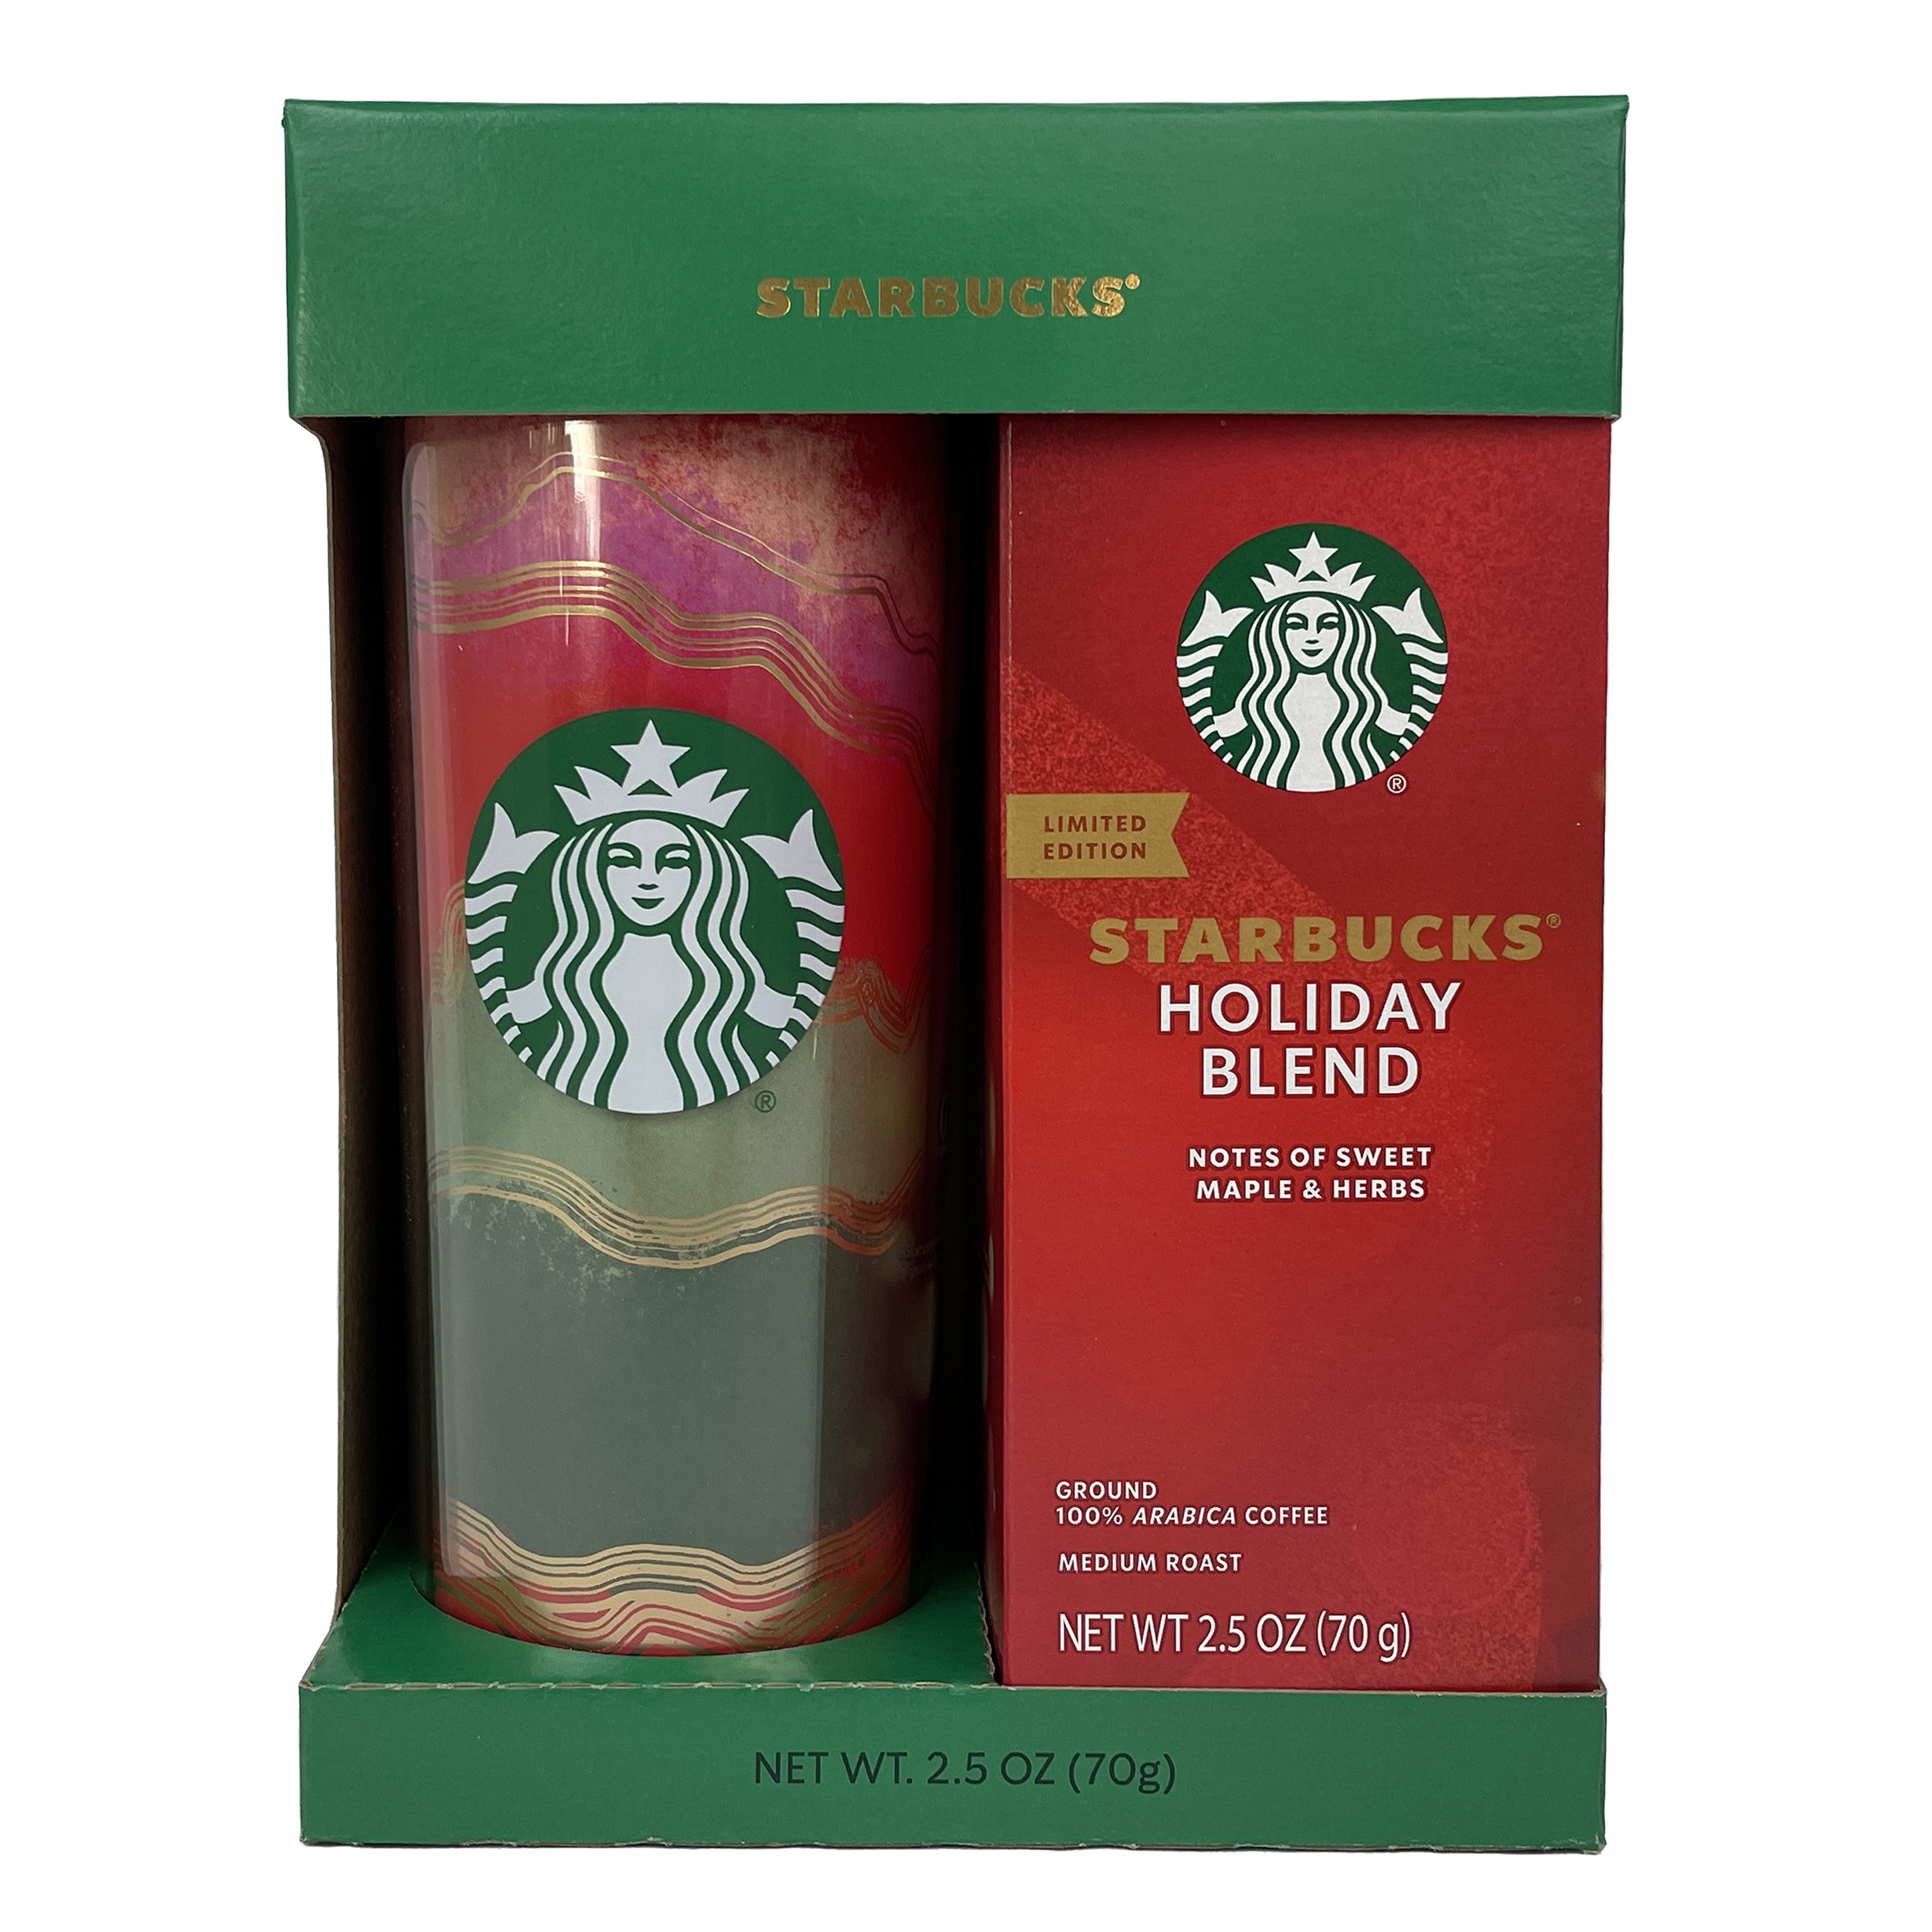 Starbucks Holiday Gift Pack - Savor the moment with Stainless Steel Tumbler and Starbucks Holiday Blend - image 1 of 2